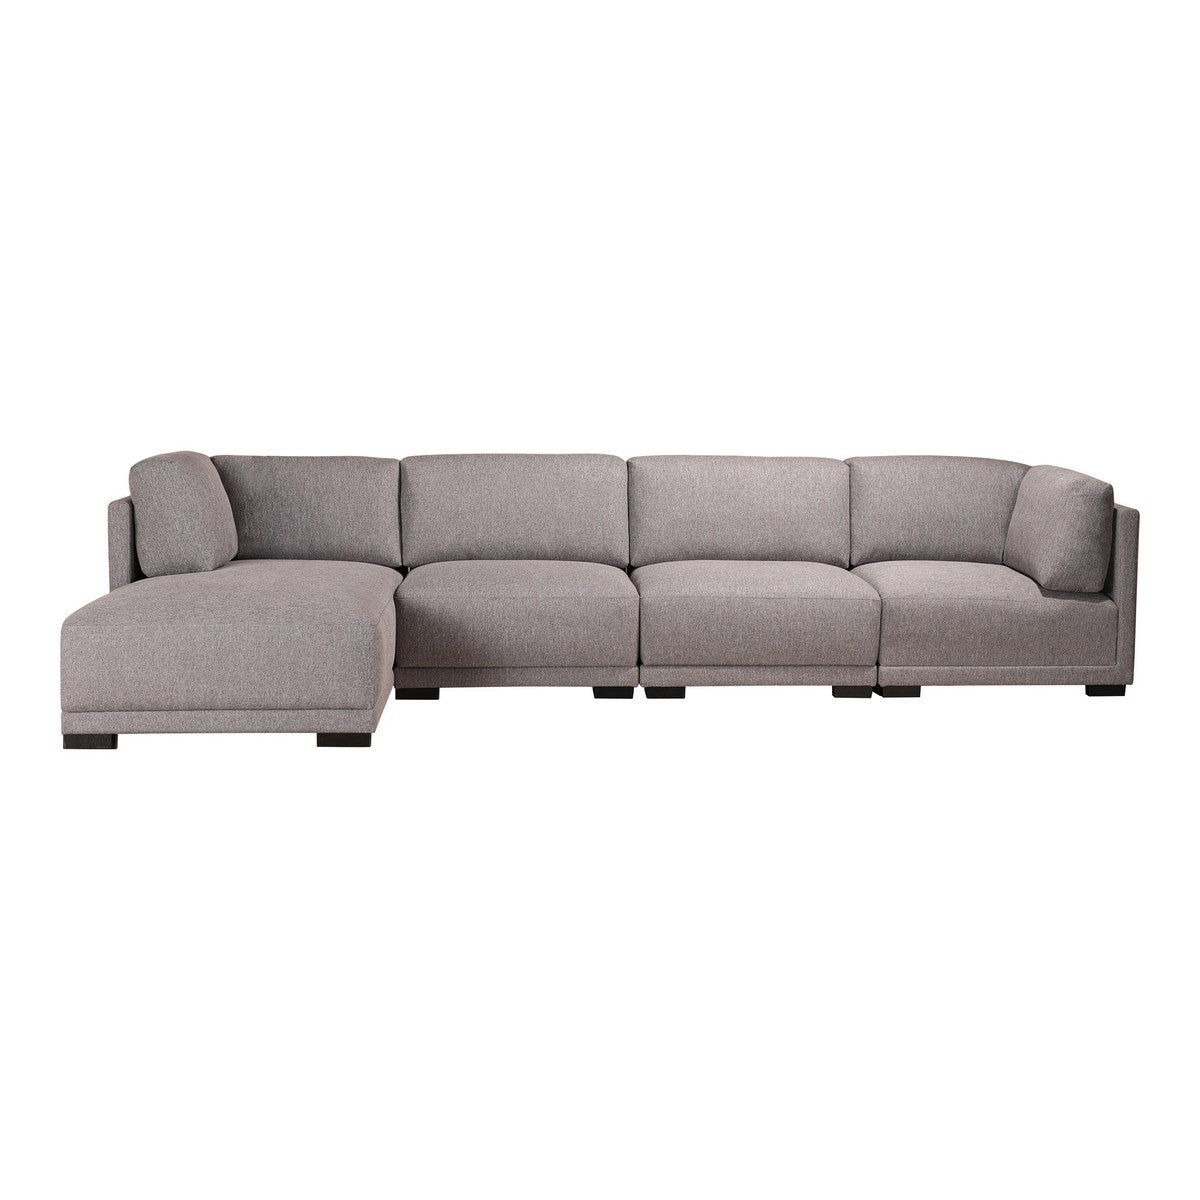 Moe's Home Collection Romeo Modular Sectional Left Grey - RN-1119-29 - Moe's Home Collection - Extras - Minimal And Modern - 1